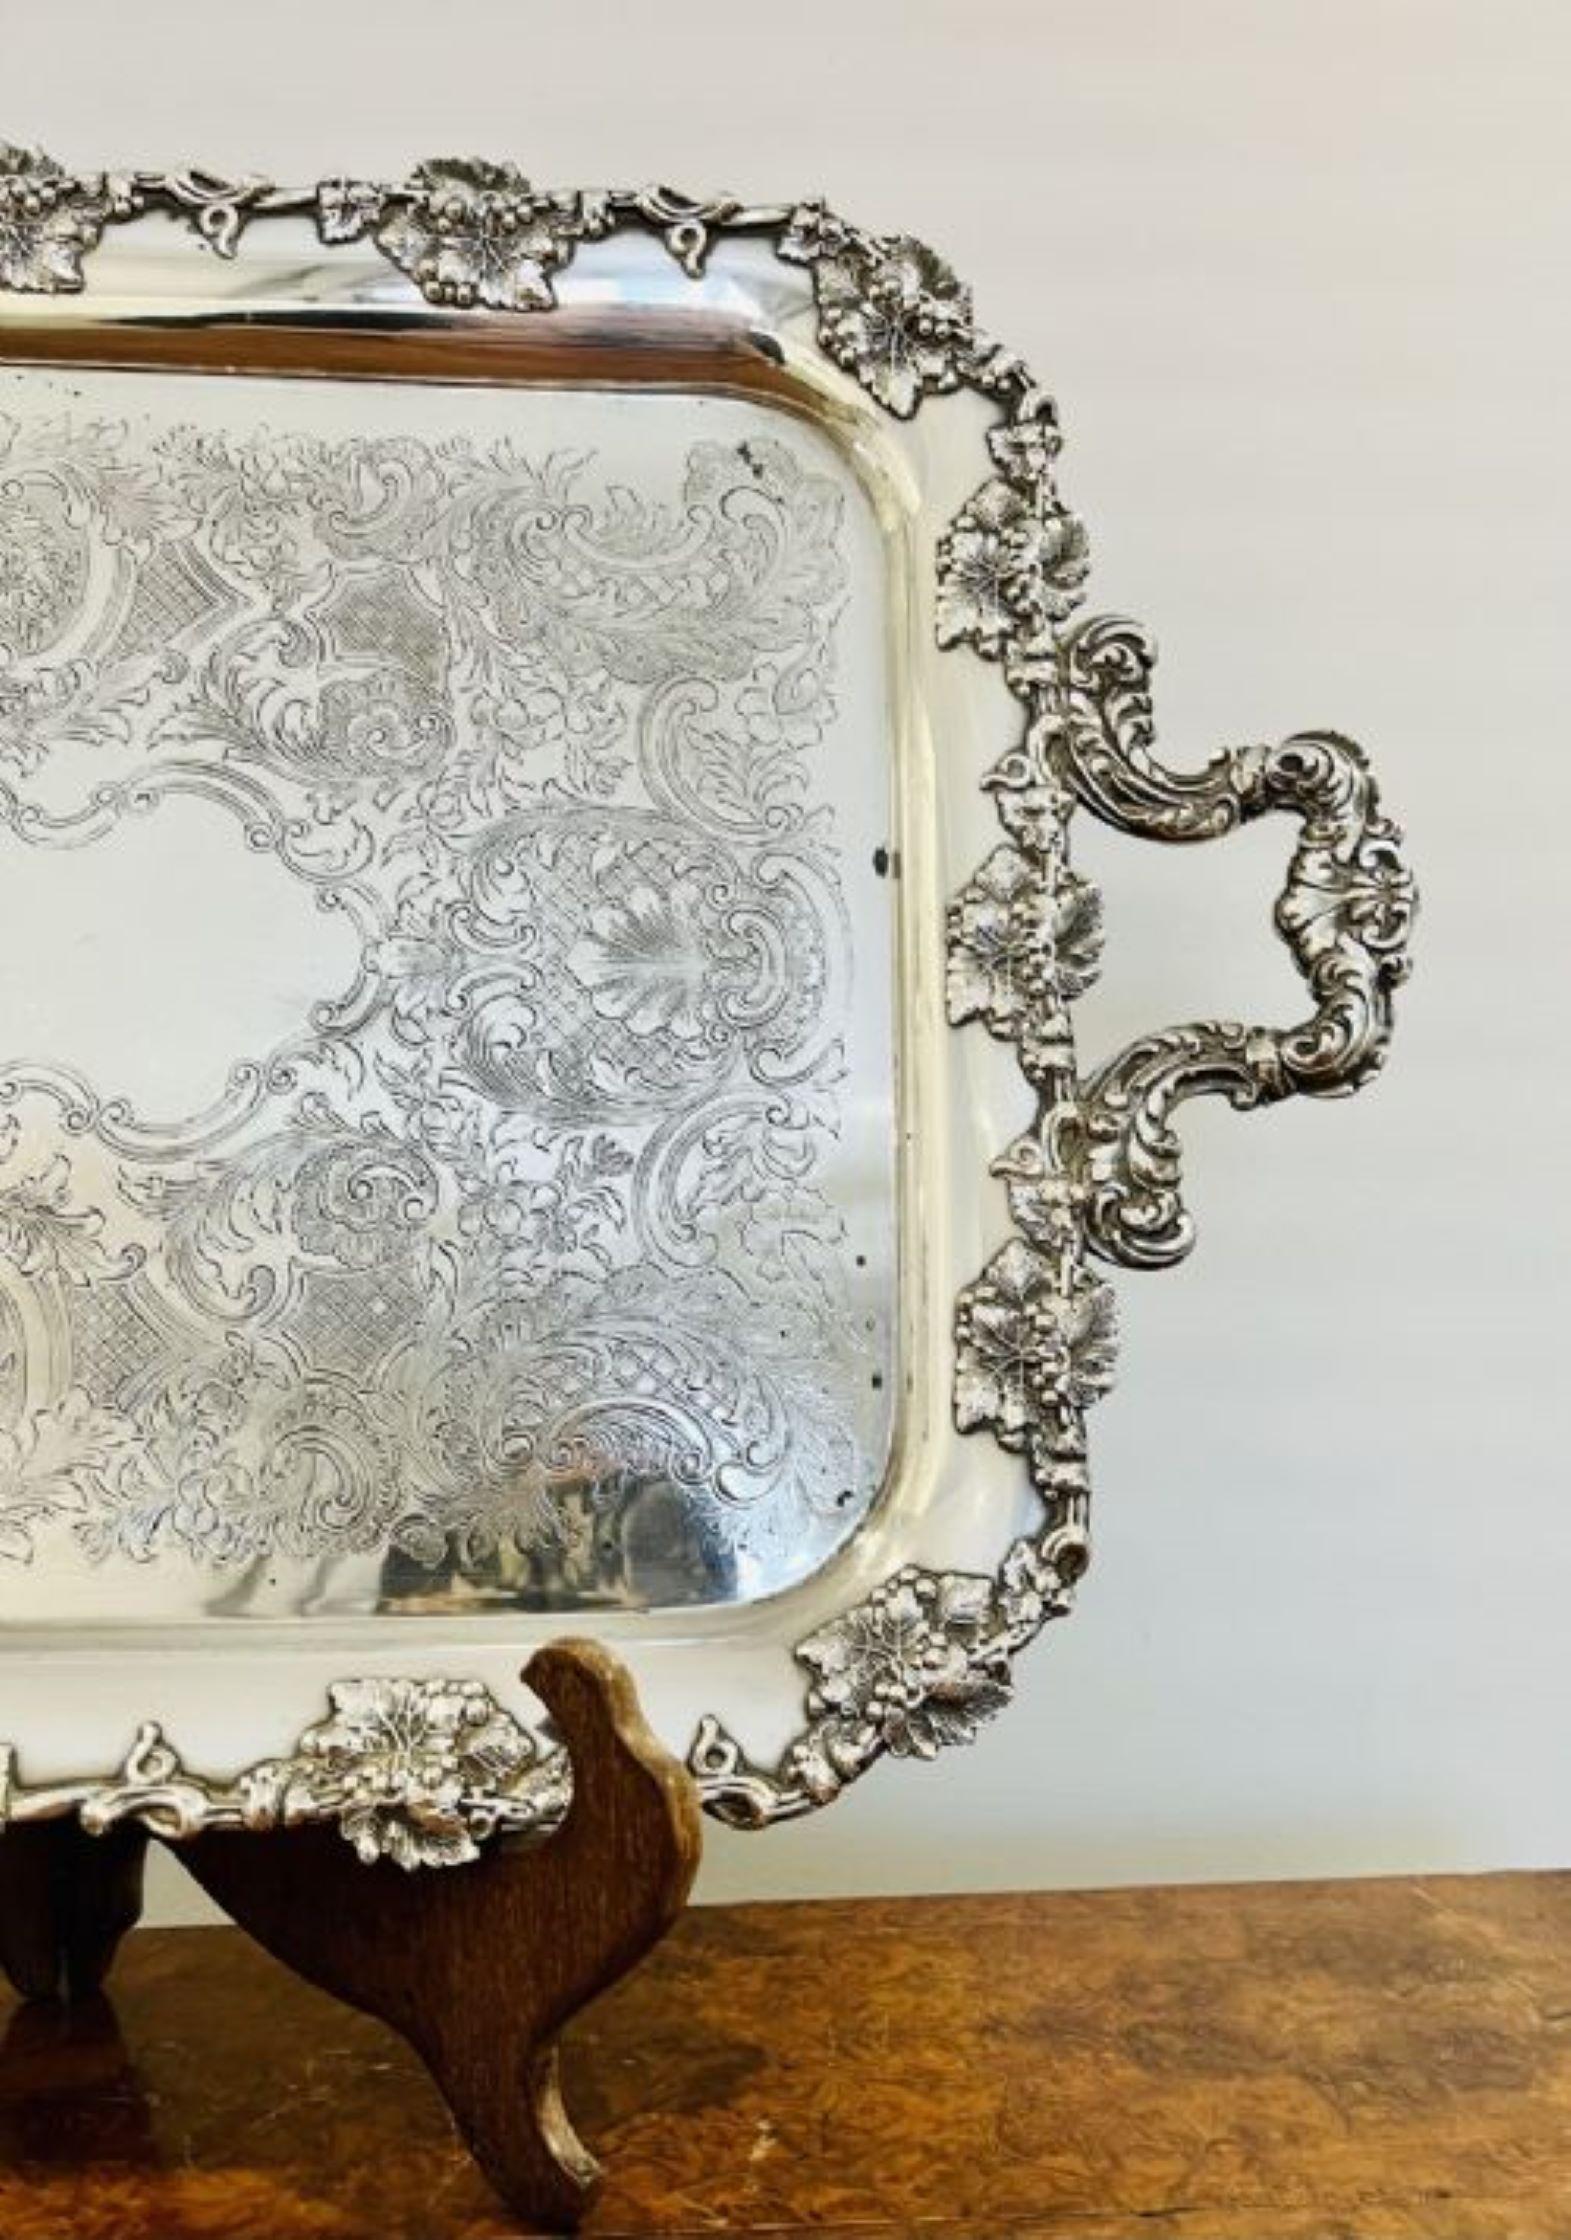 Quality antique Victorian silver plated ornate serving tray having a quality large serving tray with relief decoration with trailing vines and two ornate carrying handles to both sides 